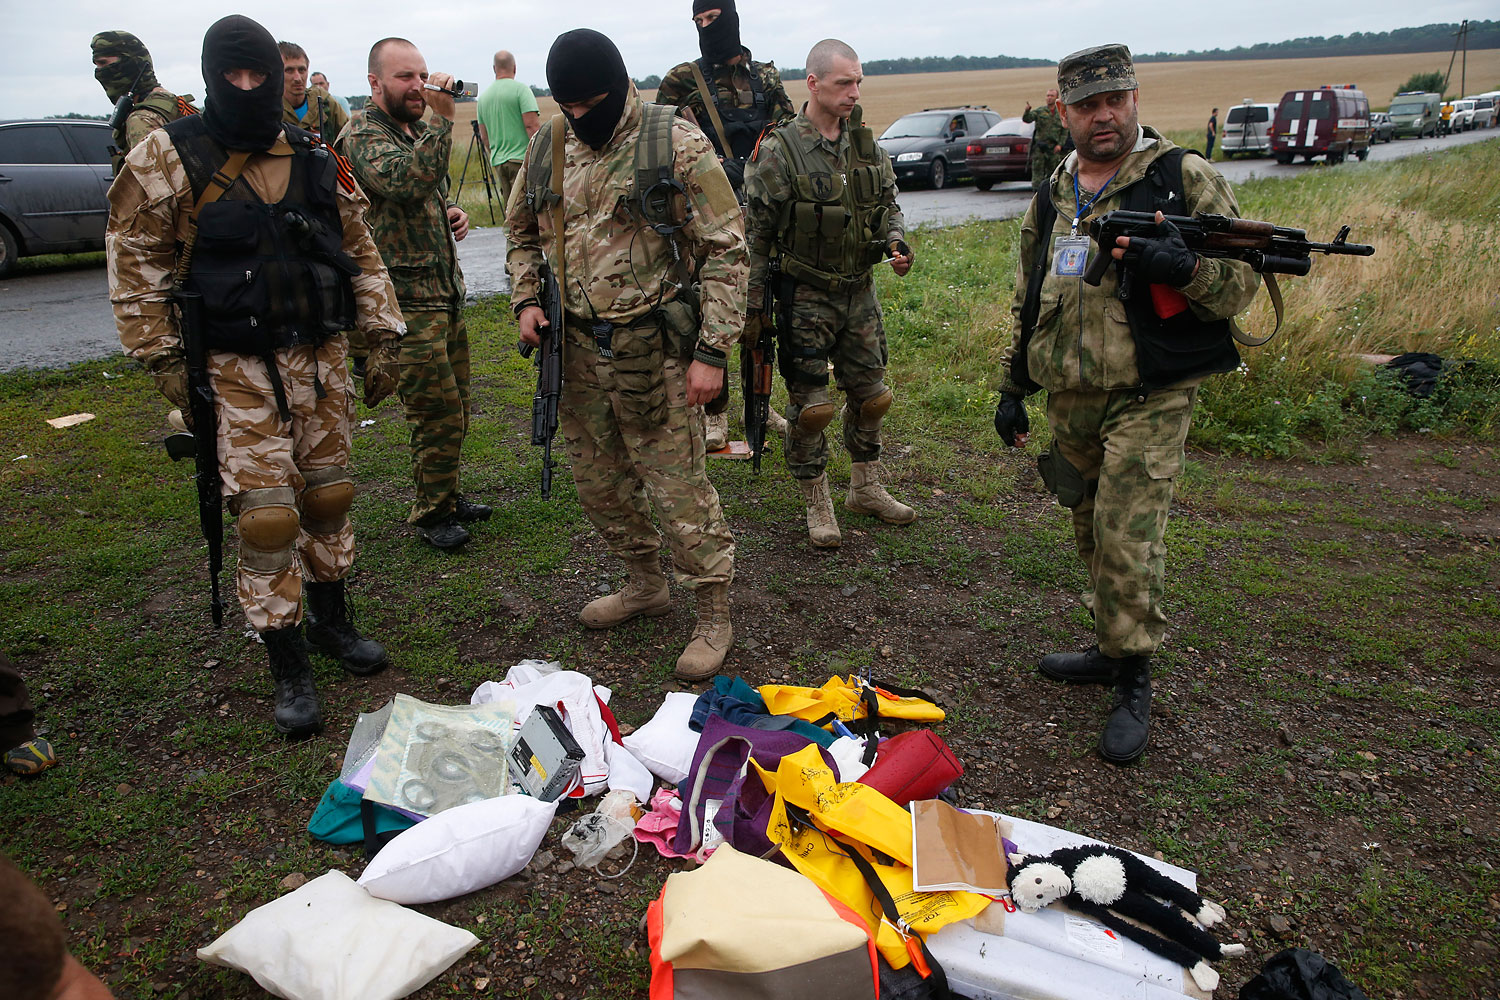 Pro-Russian separatists look at passengers' belongings at the crash site of Malaysia Airlines flight MH17, near the settlement of Grabovo in the Donetsk region